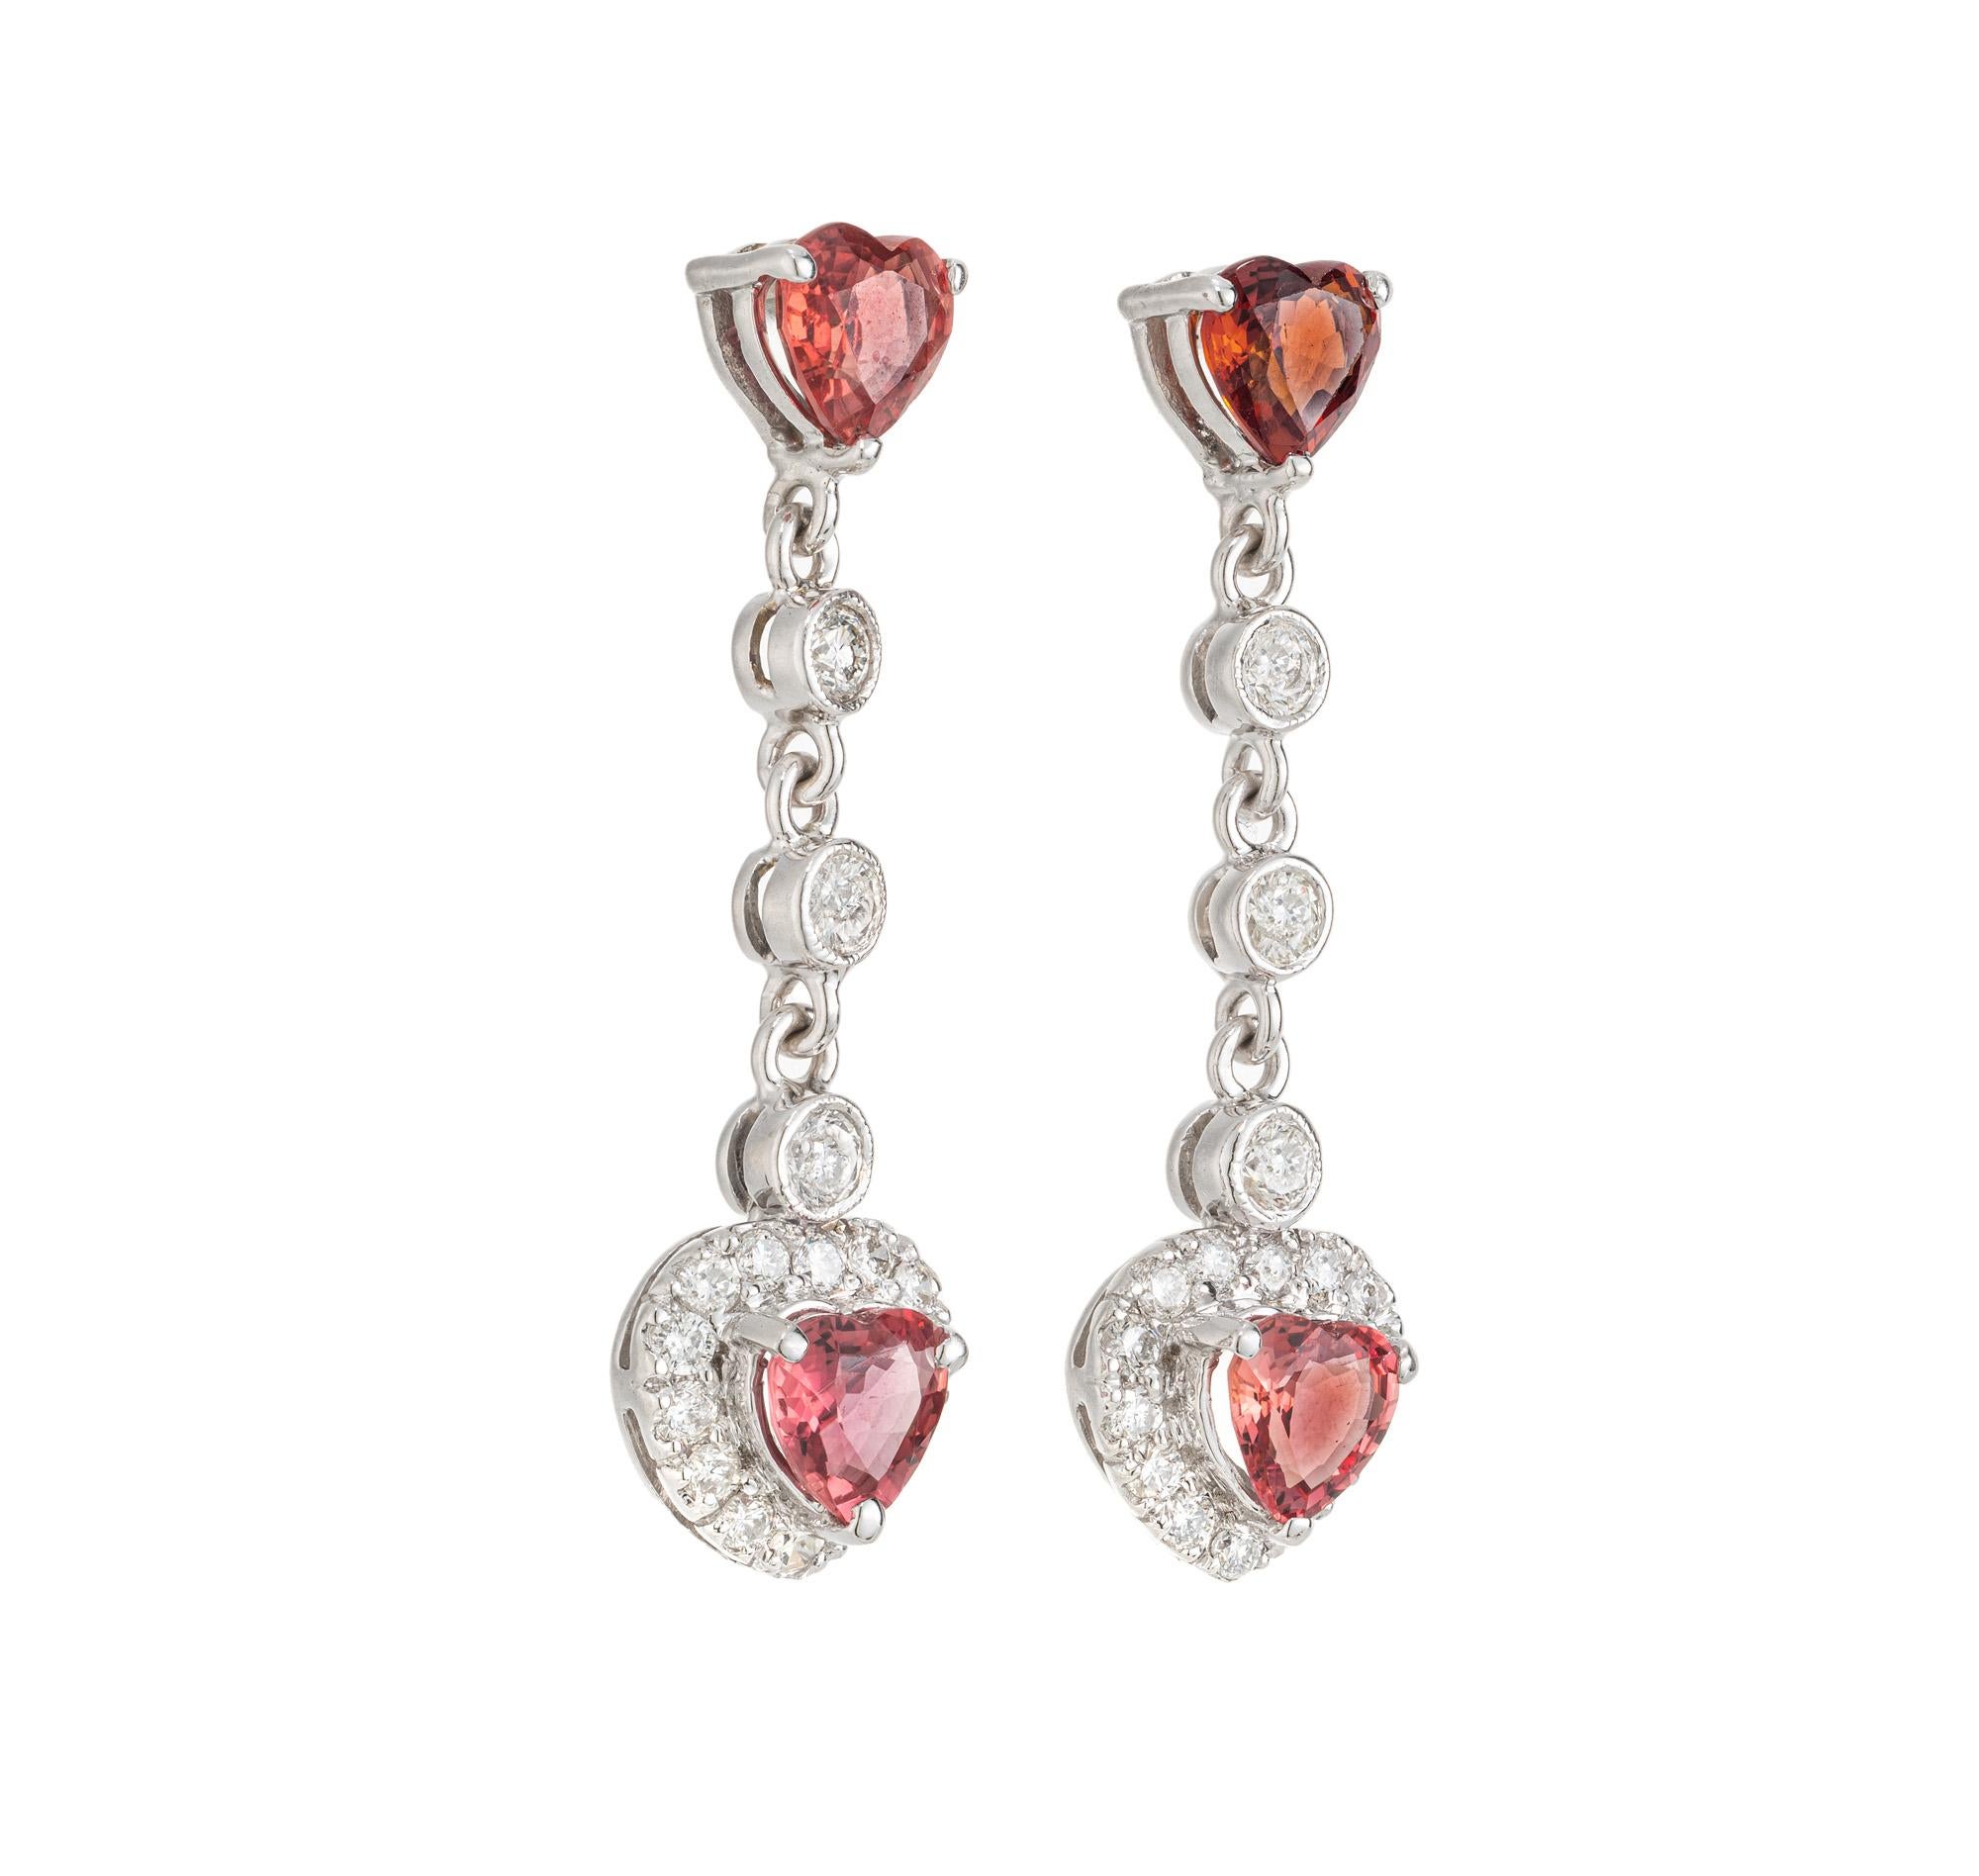 Unique Orange Heart Sapphire Diamond Gold Drop Dangle Earrings. The centerpiece of these earrings are the 4 stunning 1.50 carat orange heart sapphires. The larger dangle sapphires each are framed by a shimmering halo of round cut diamonds. The